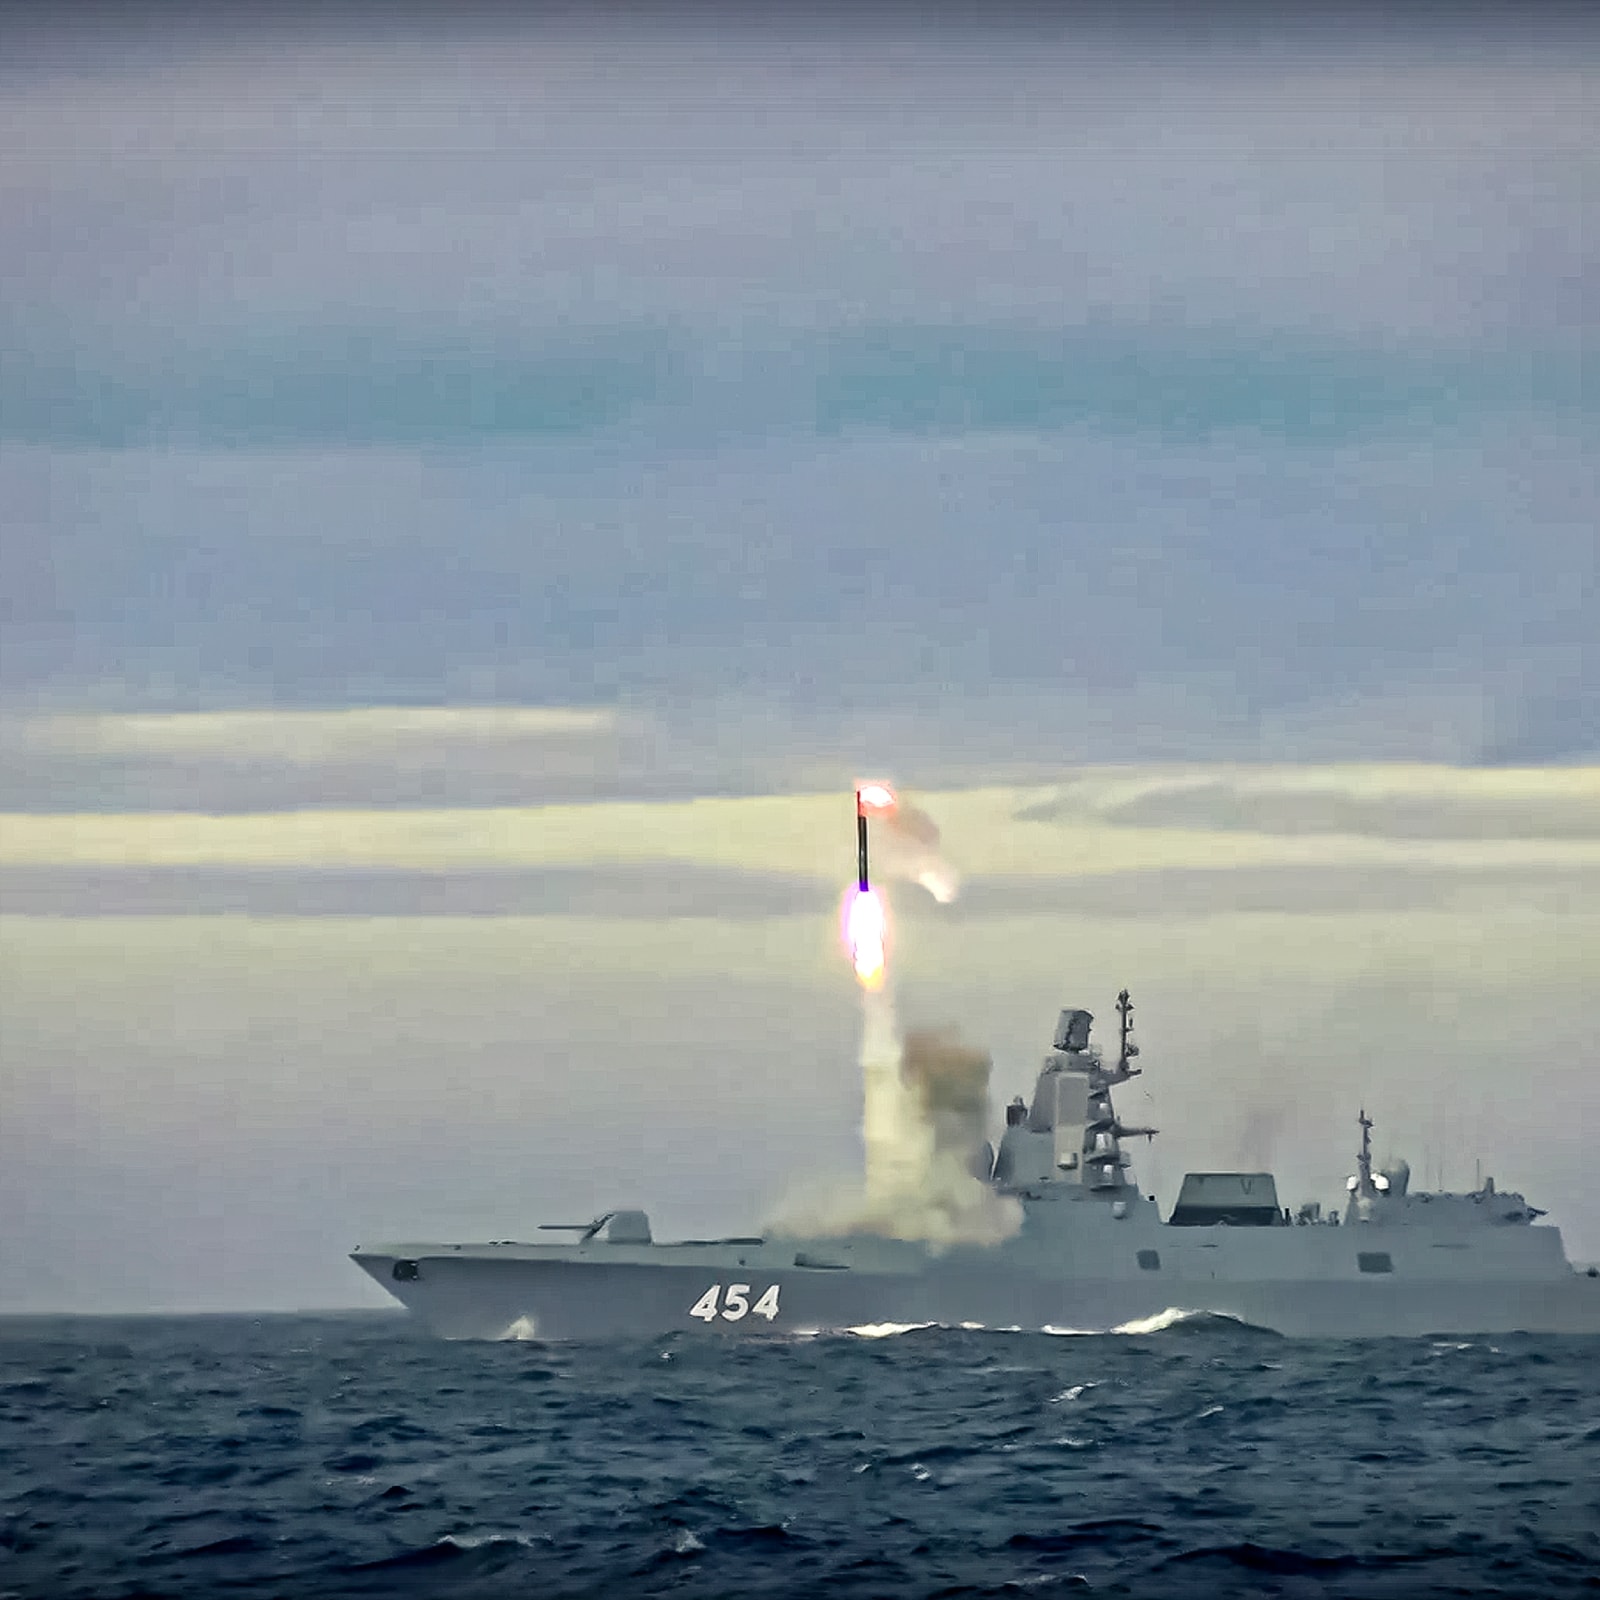 A new Zircon hypersonic cruise missile is launched by the frigate Admiral Gorshkov of the Russian navy from the Barents Sea. Russia's Defense Ministry said the Russian navy successfully launched a new hypersonic missile from the Barents Sea. The ministry said the recently developed Zircon hypersonic cruise missile had struck its target about 1,000 kilometers away. (Image And Caption: Russian Defense Ministry Press Service via AP)